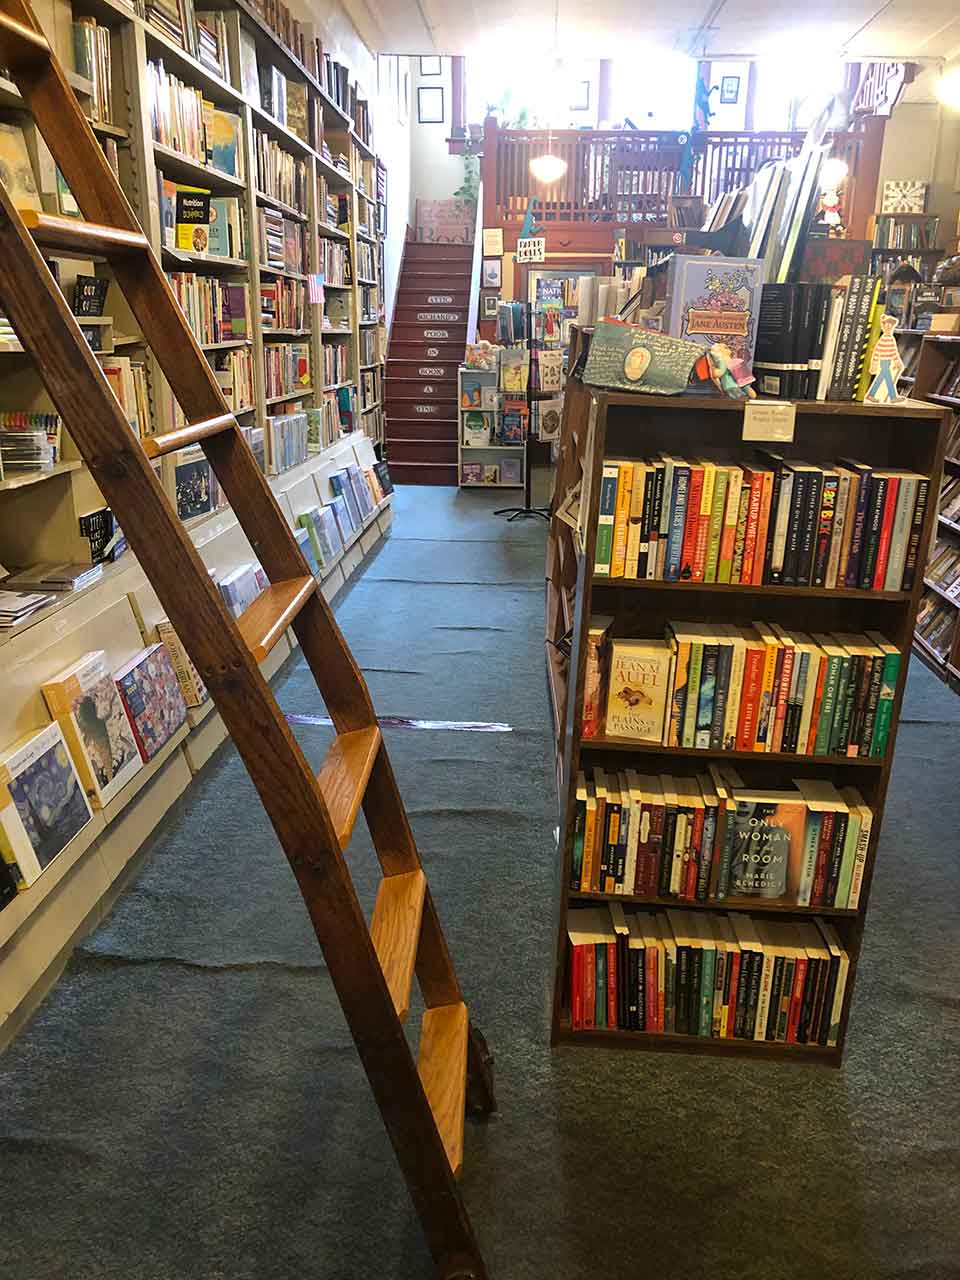 A photograph of the interior of Poor Richard's Books